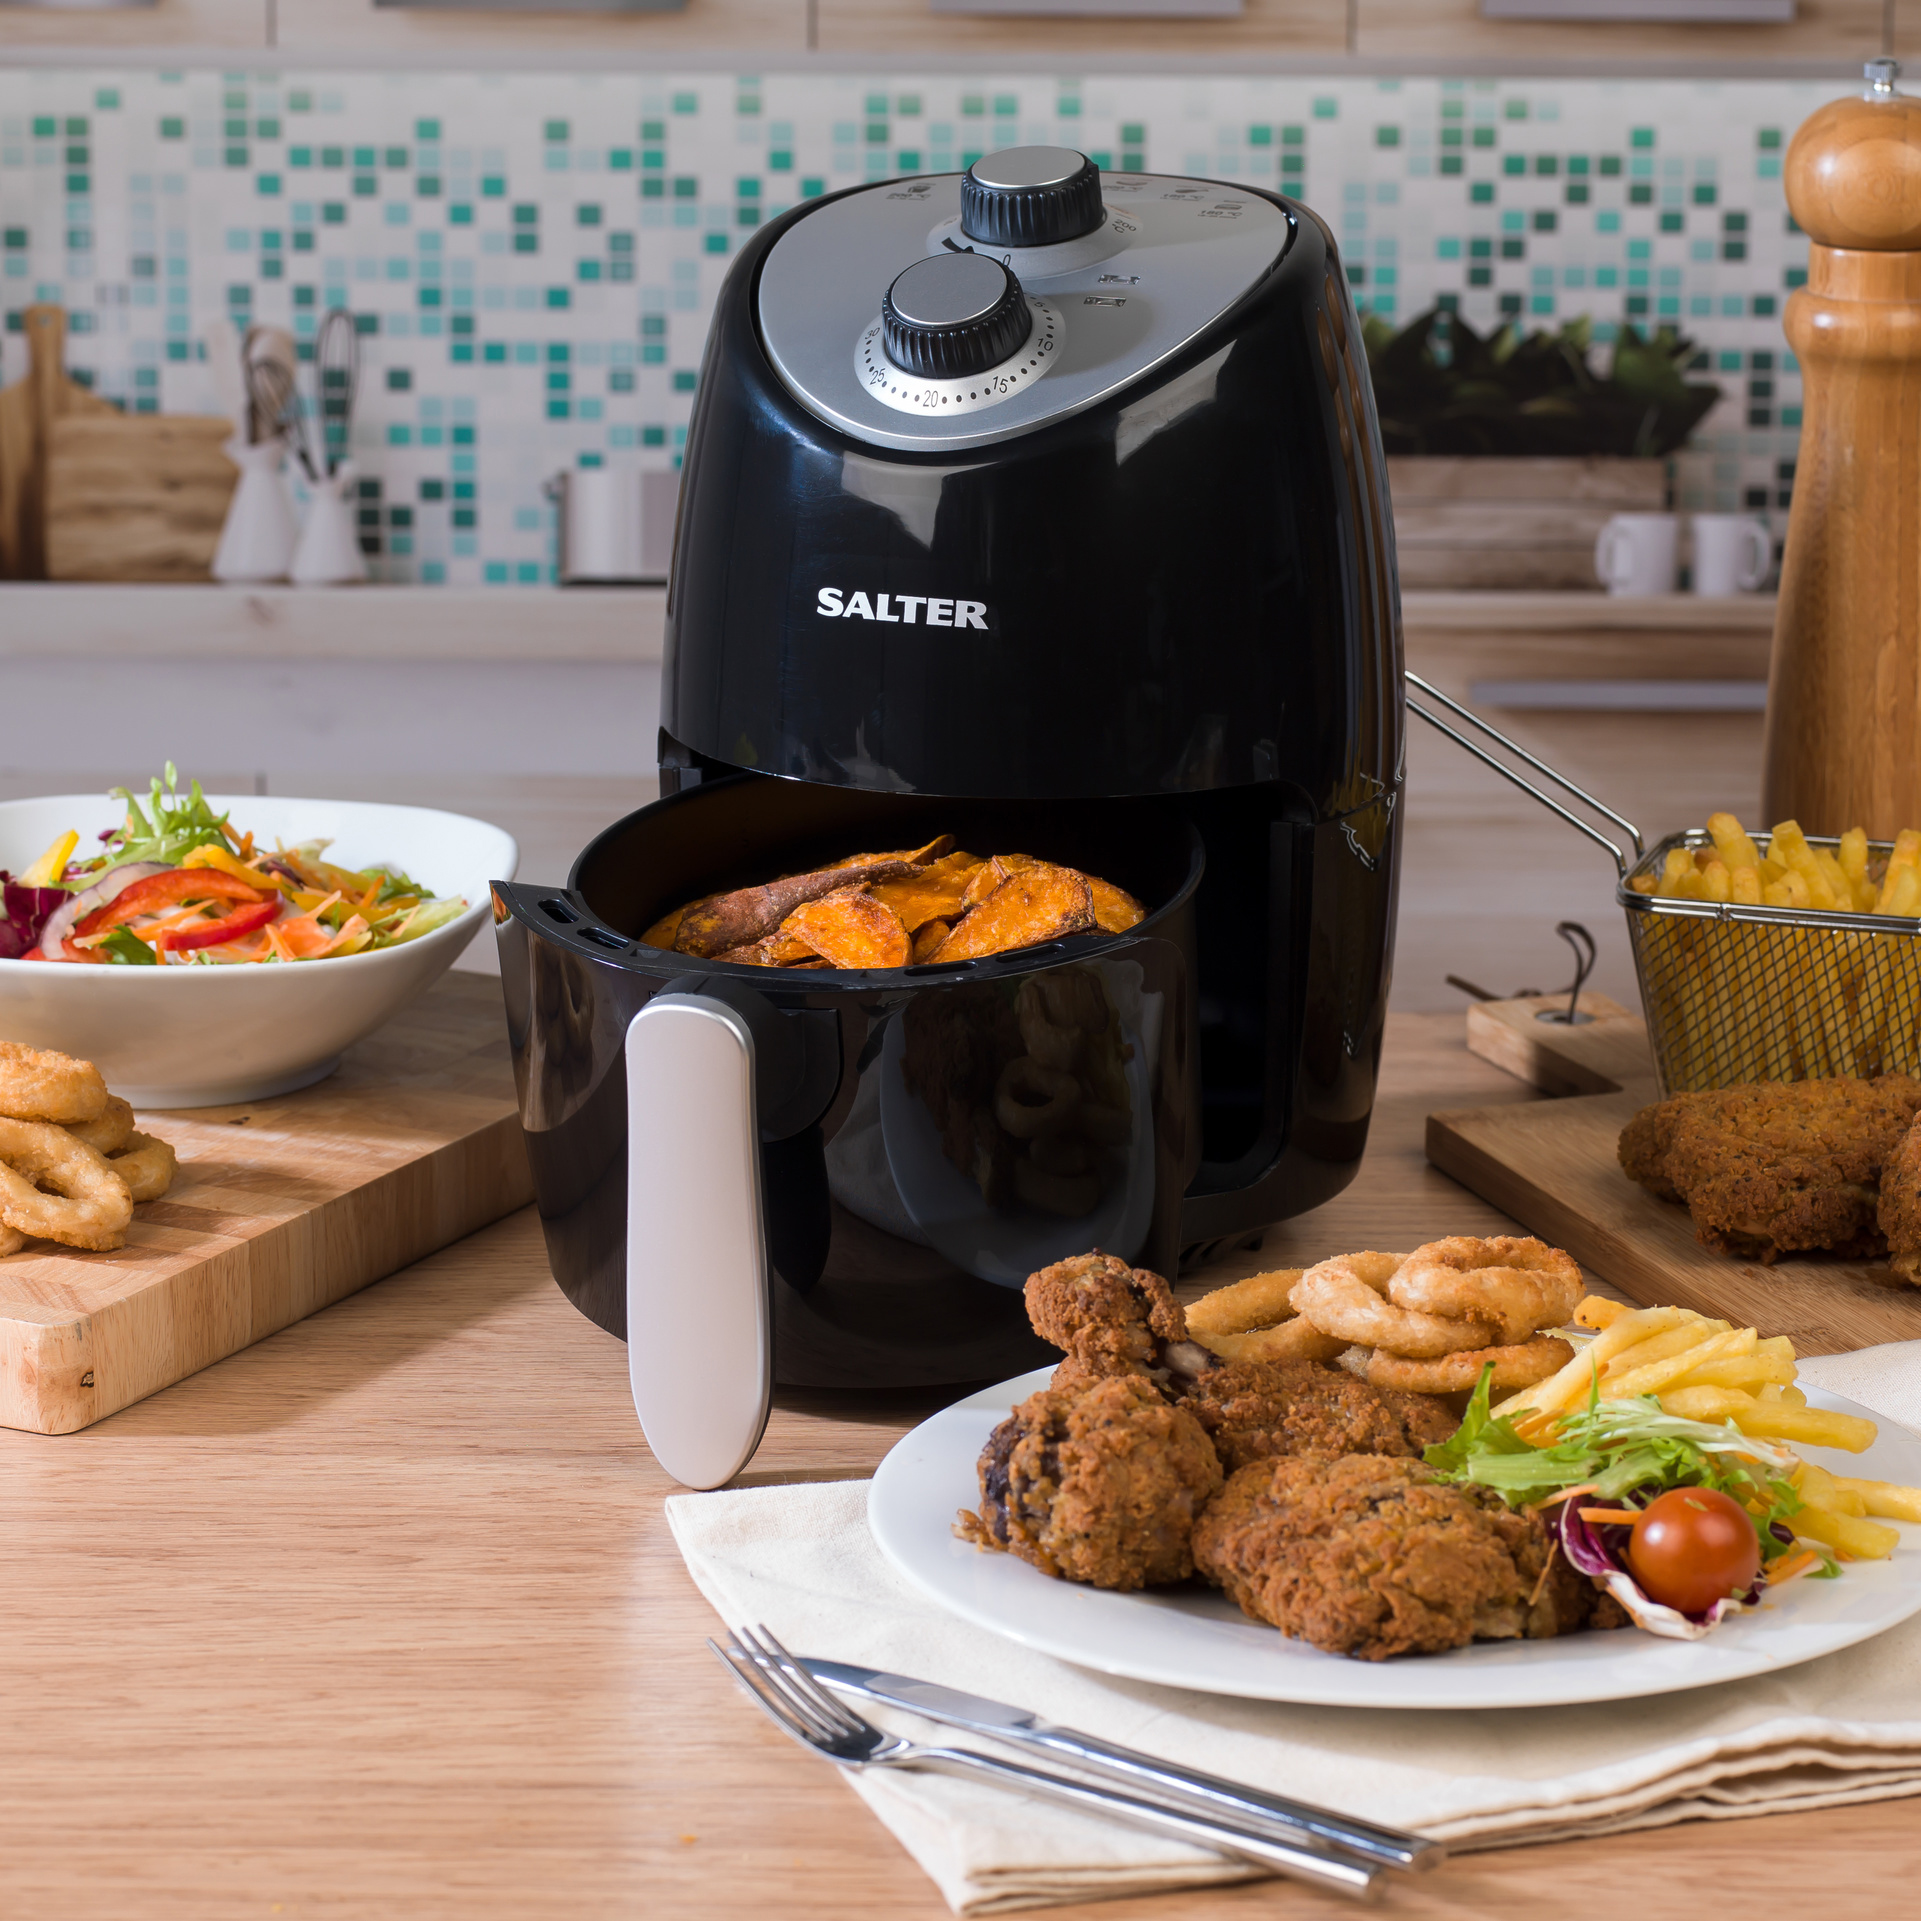 A Salter Compact Hot Air Fryer open with Chicken on a plate